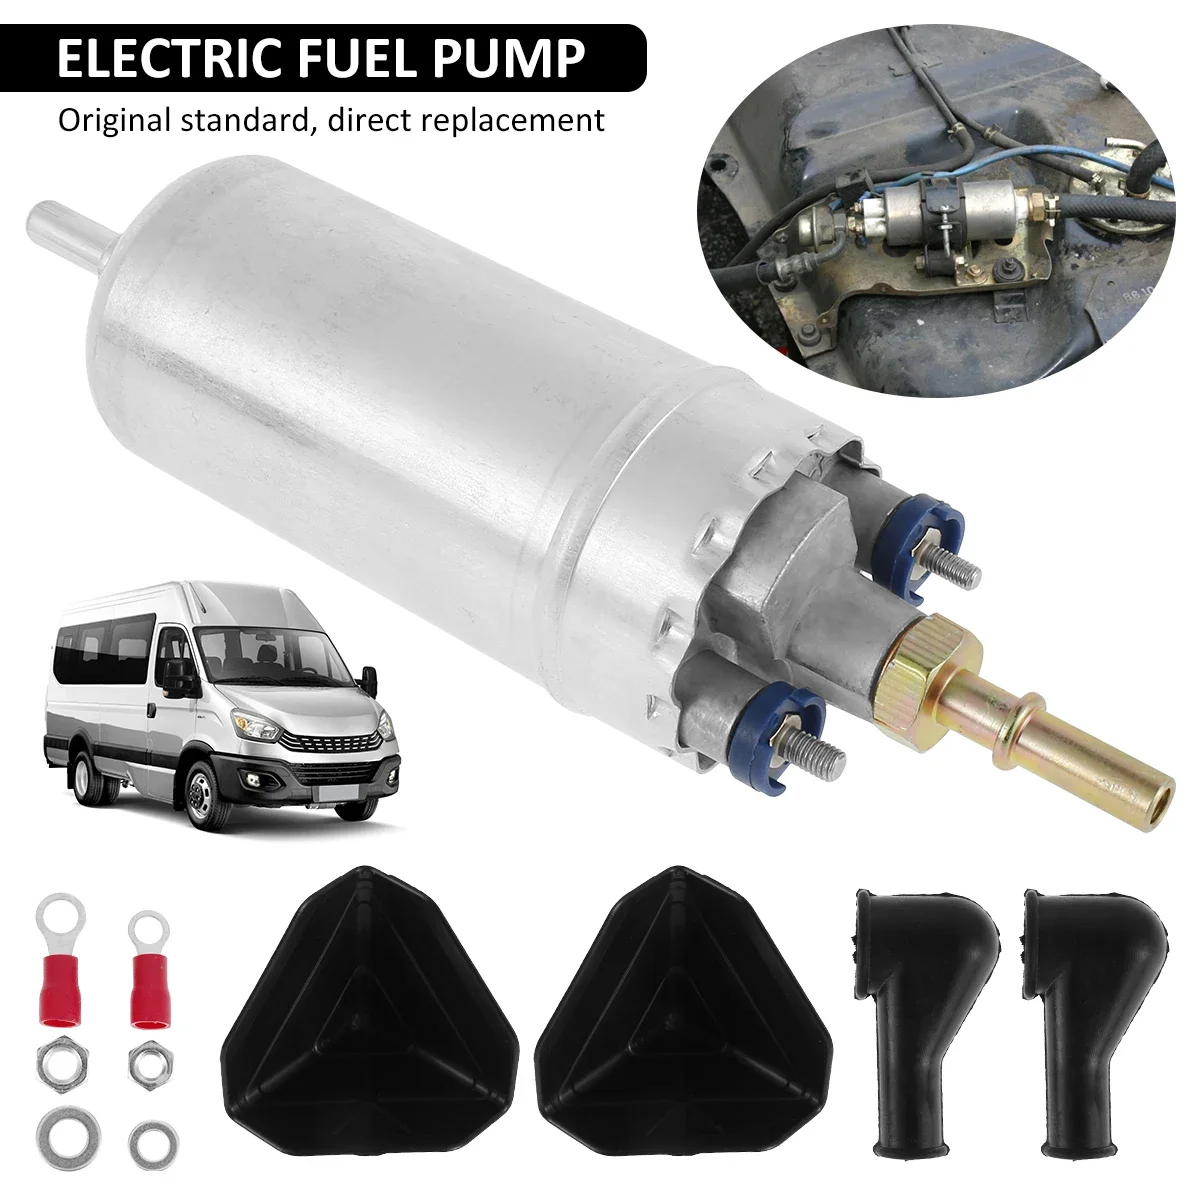 12V Electric Fuel Pump High Flow Electric Diesel Pump Metal Fuel Transfer  Pump Kit For IVECO DAILY MK III Palio Auto Accessories - AliExpress